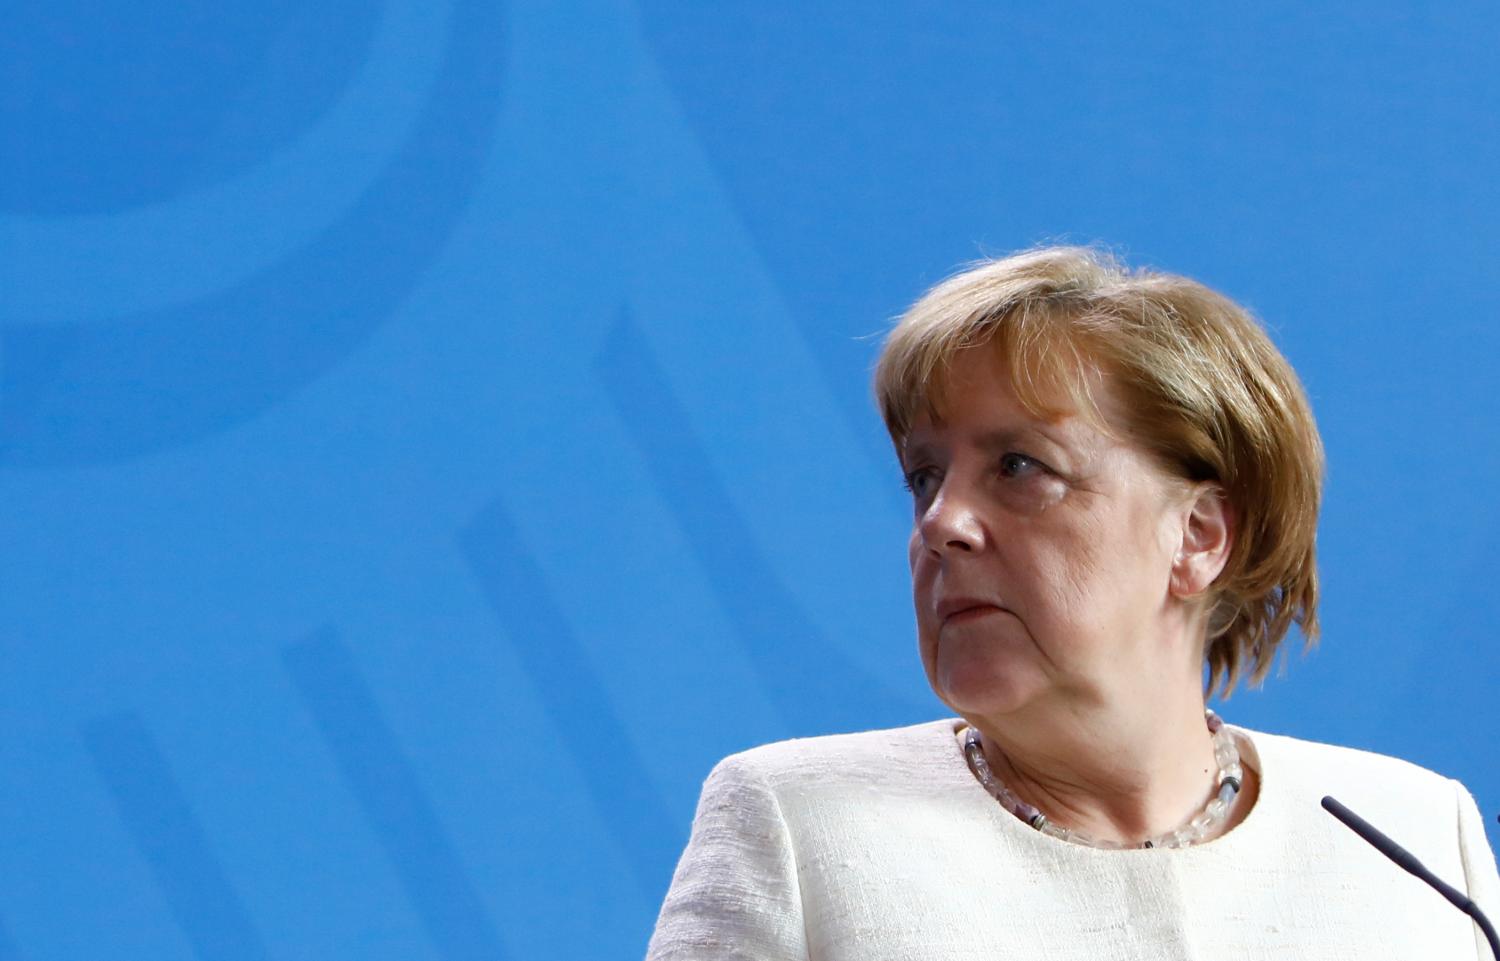 German Chancellor Angela Merkel looks on during a news conference in the chancellery in Berlin, Germany, June 12, 2018. REUTERS/Michele Tantussi - RC1F37C4F400